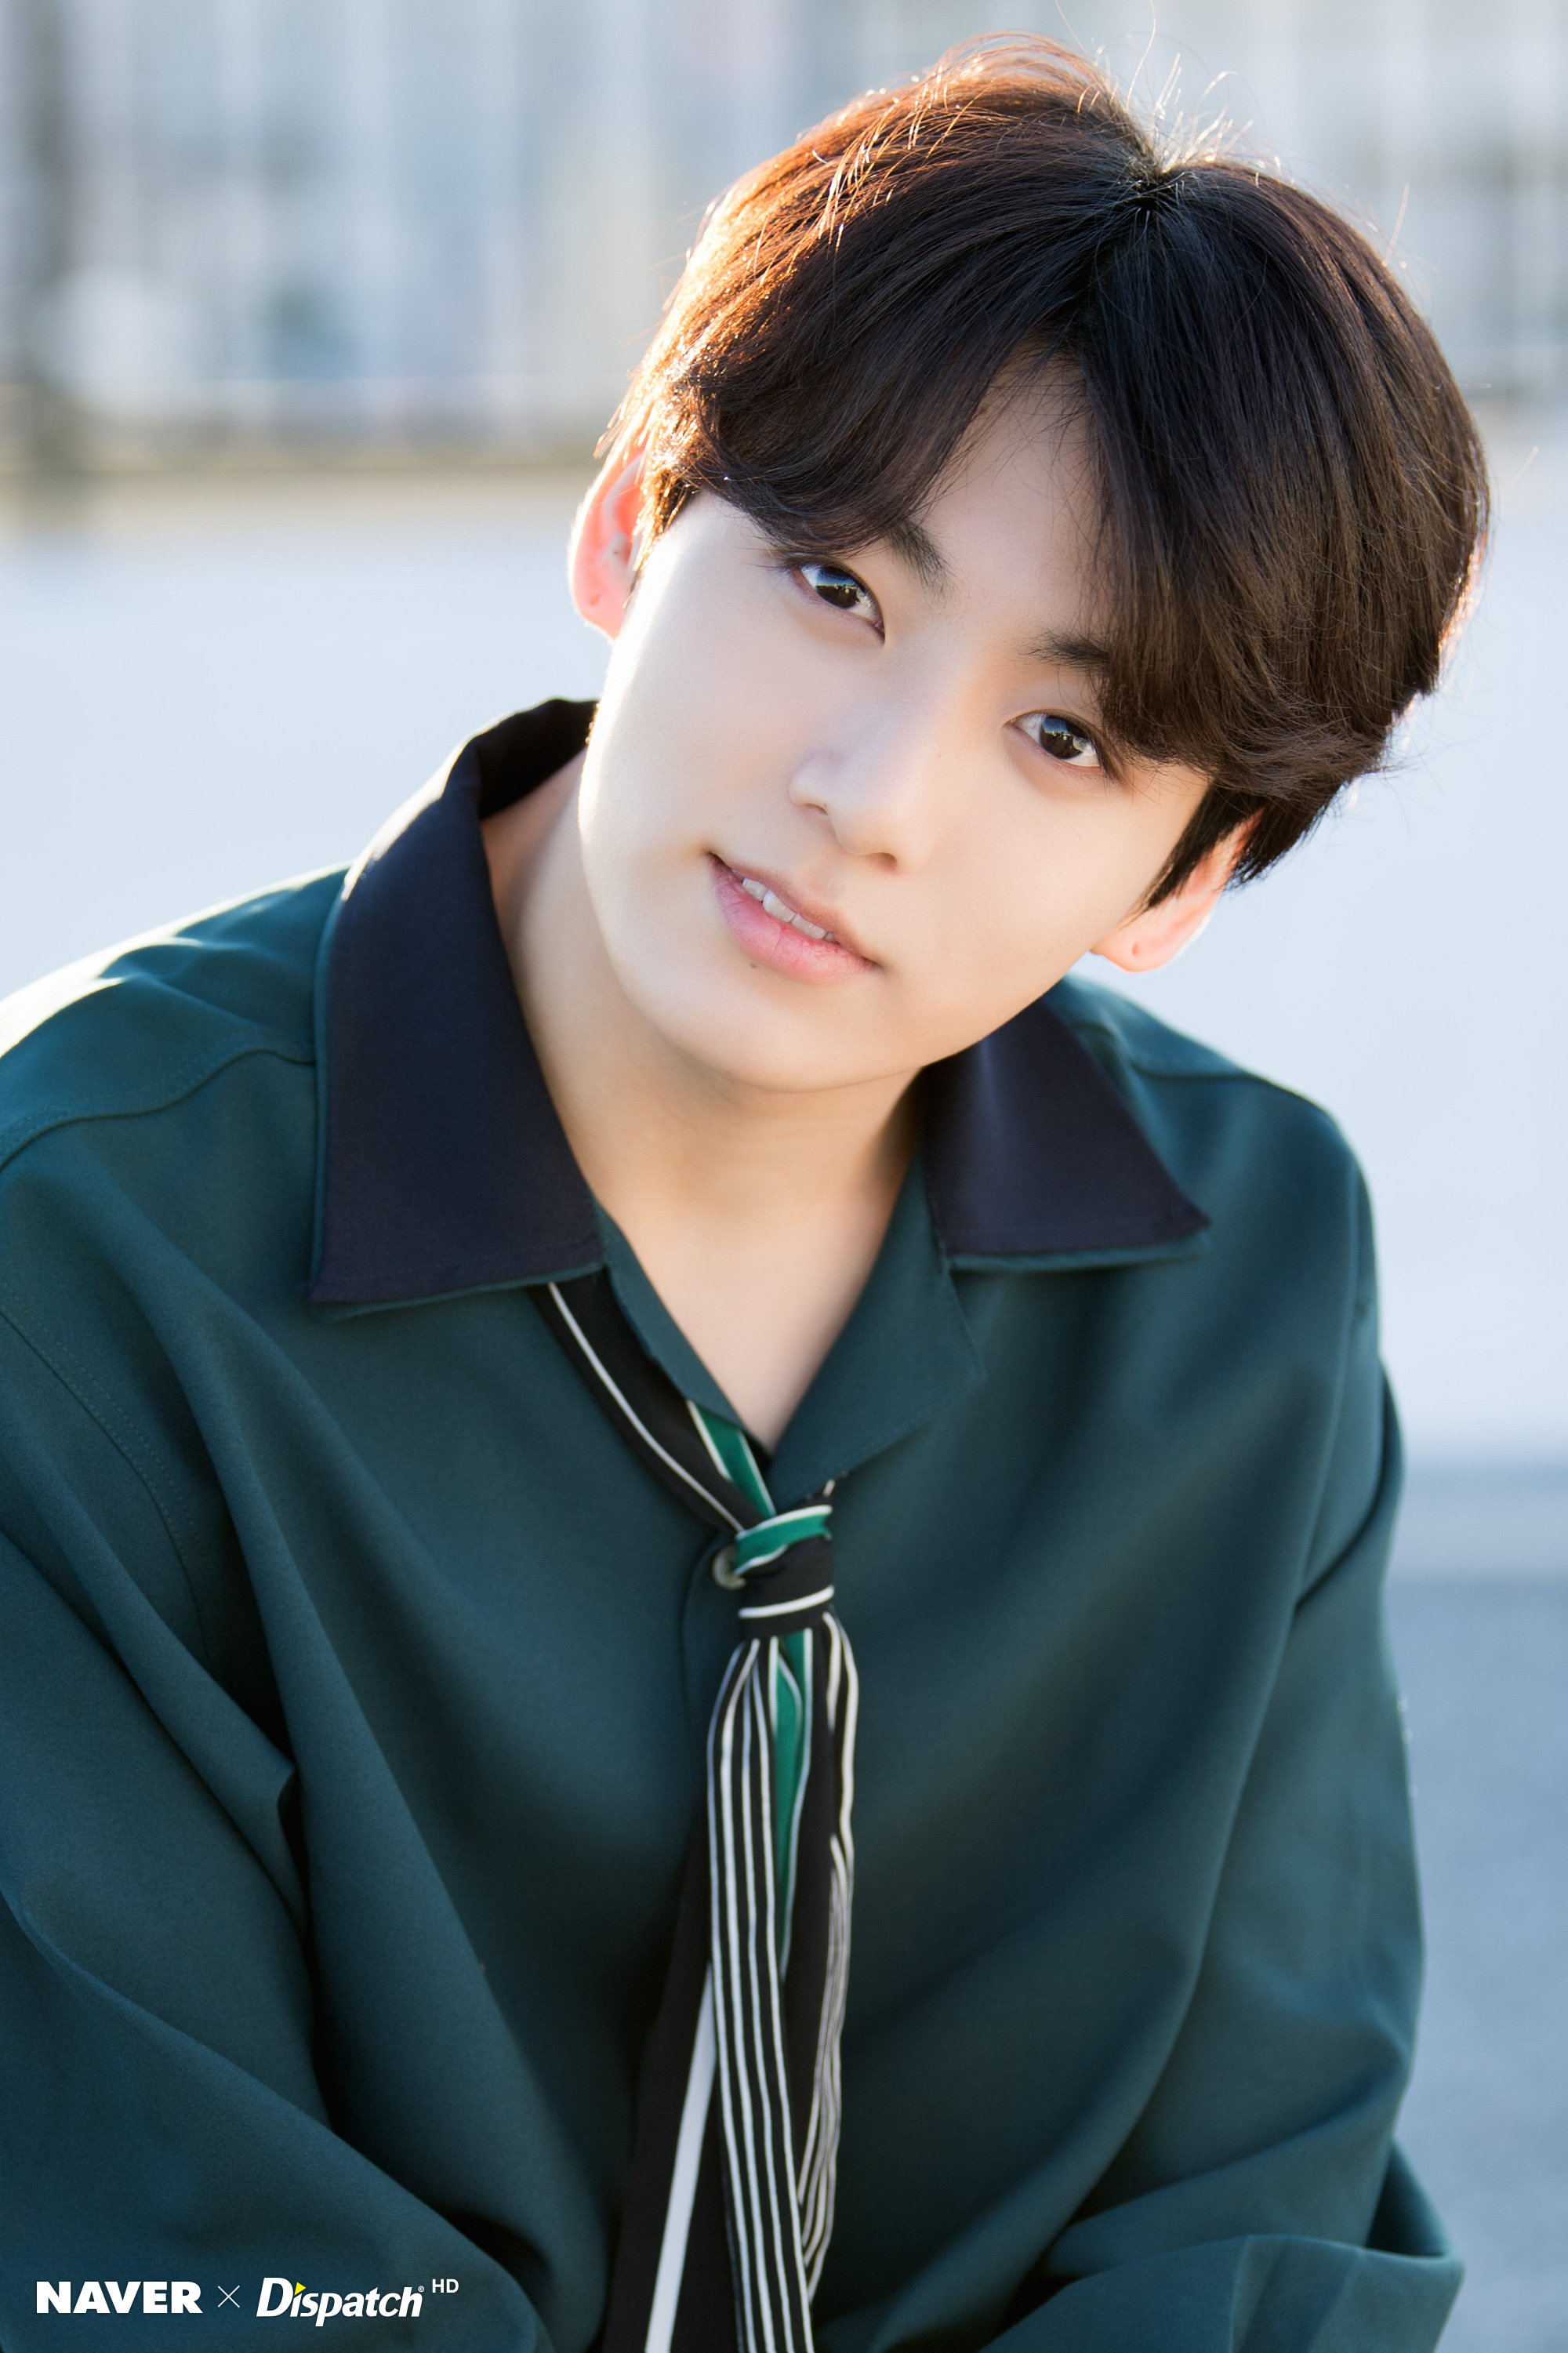 BTS image X DISPATCH FOR Jungkook ' 5TH ANNIVERSARY HD wallpaper